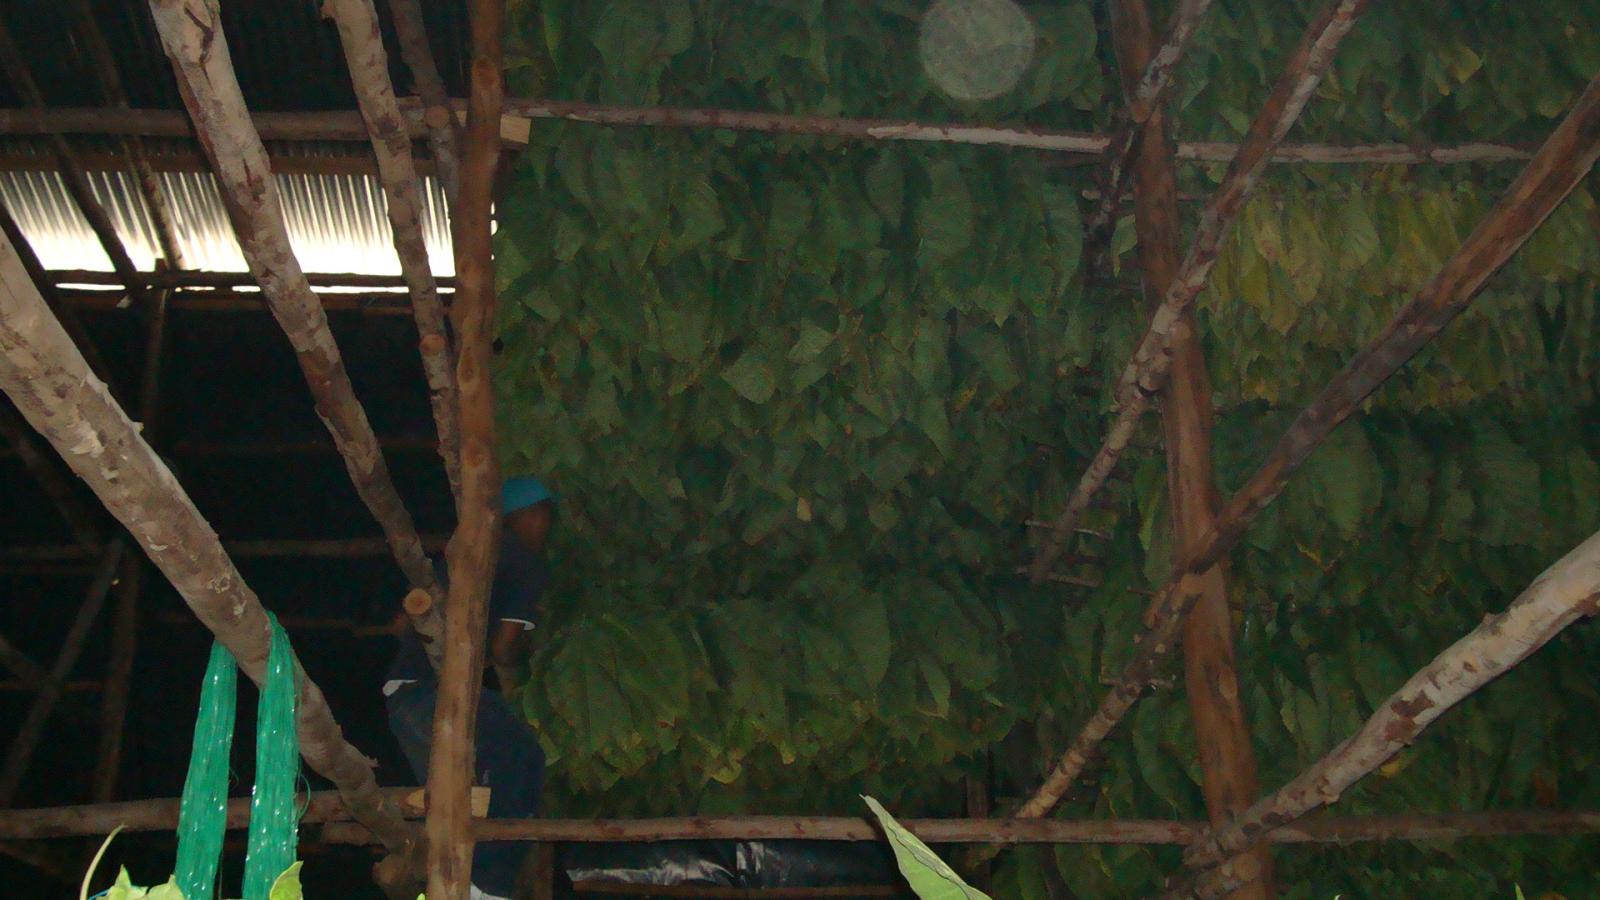 Once tied to the cuje, the tobacco is hoisted up in the air to dry in the barns